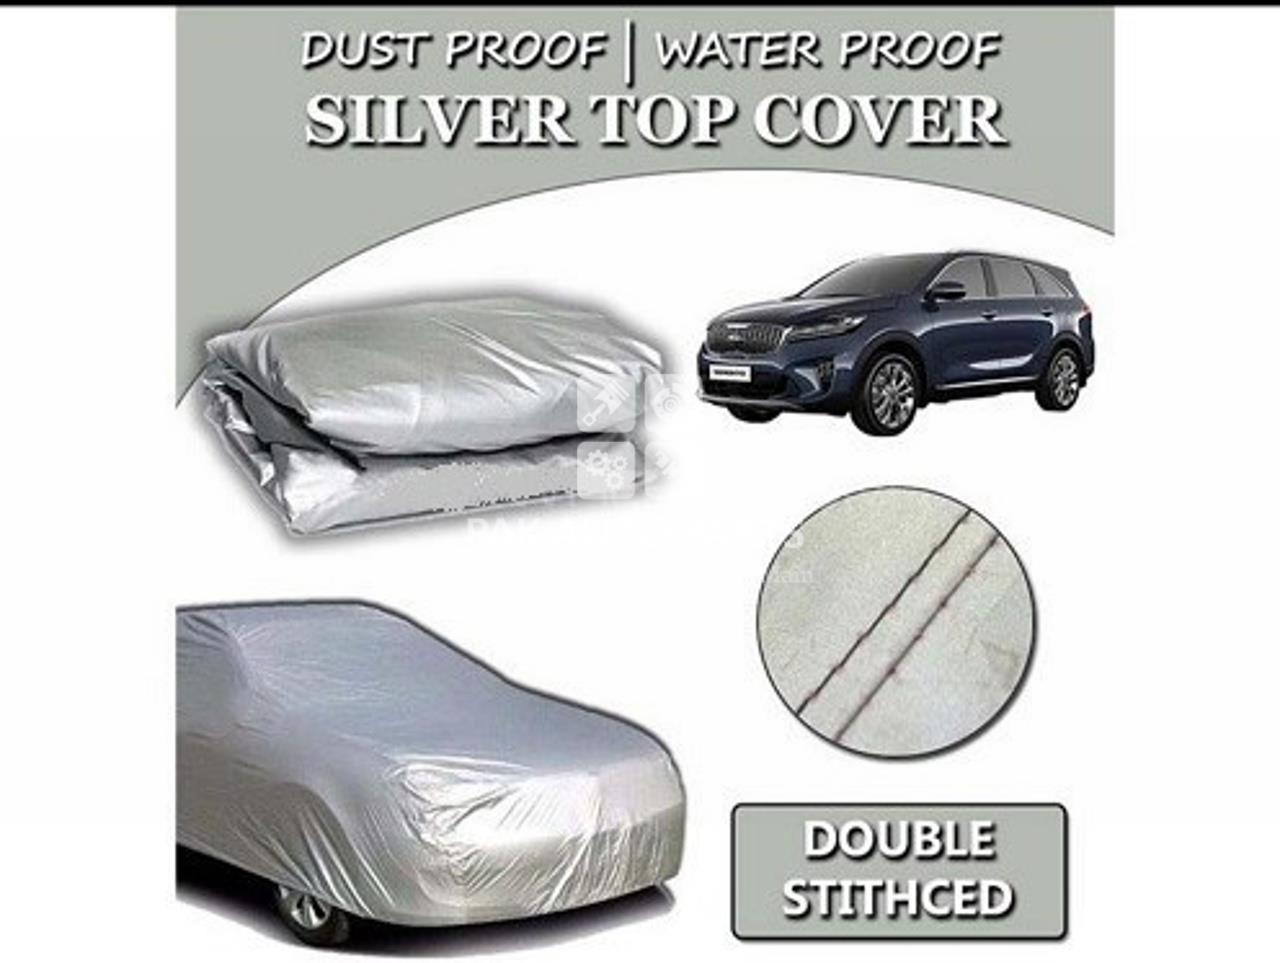 Picture of KIA Sorento Parachute | Silver Coated | Body Cover | Water, Dust & Heat Proof 100% | Double Stitched